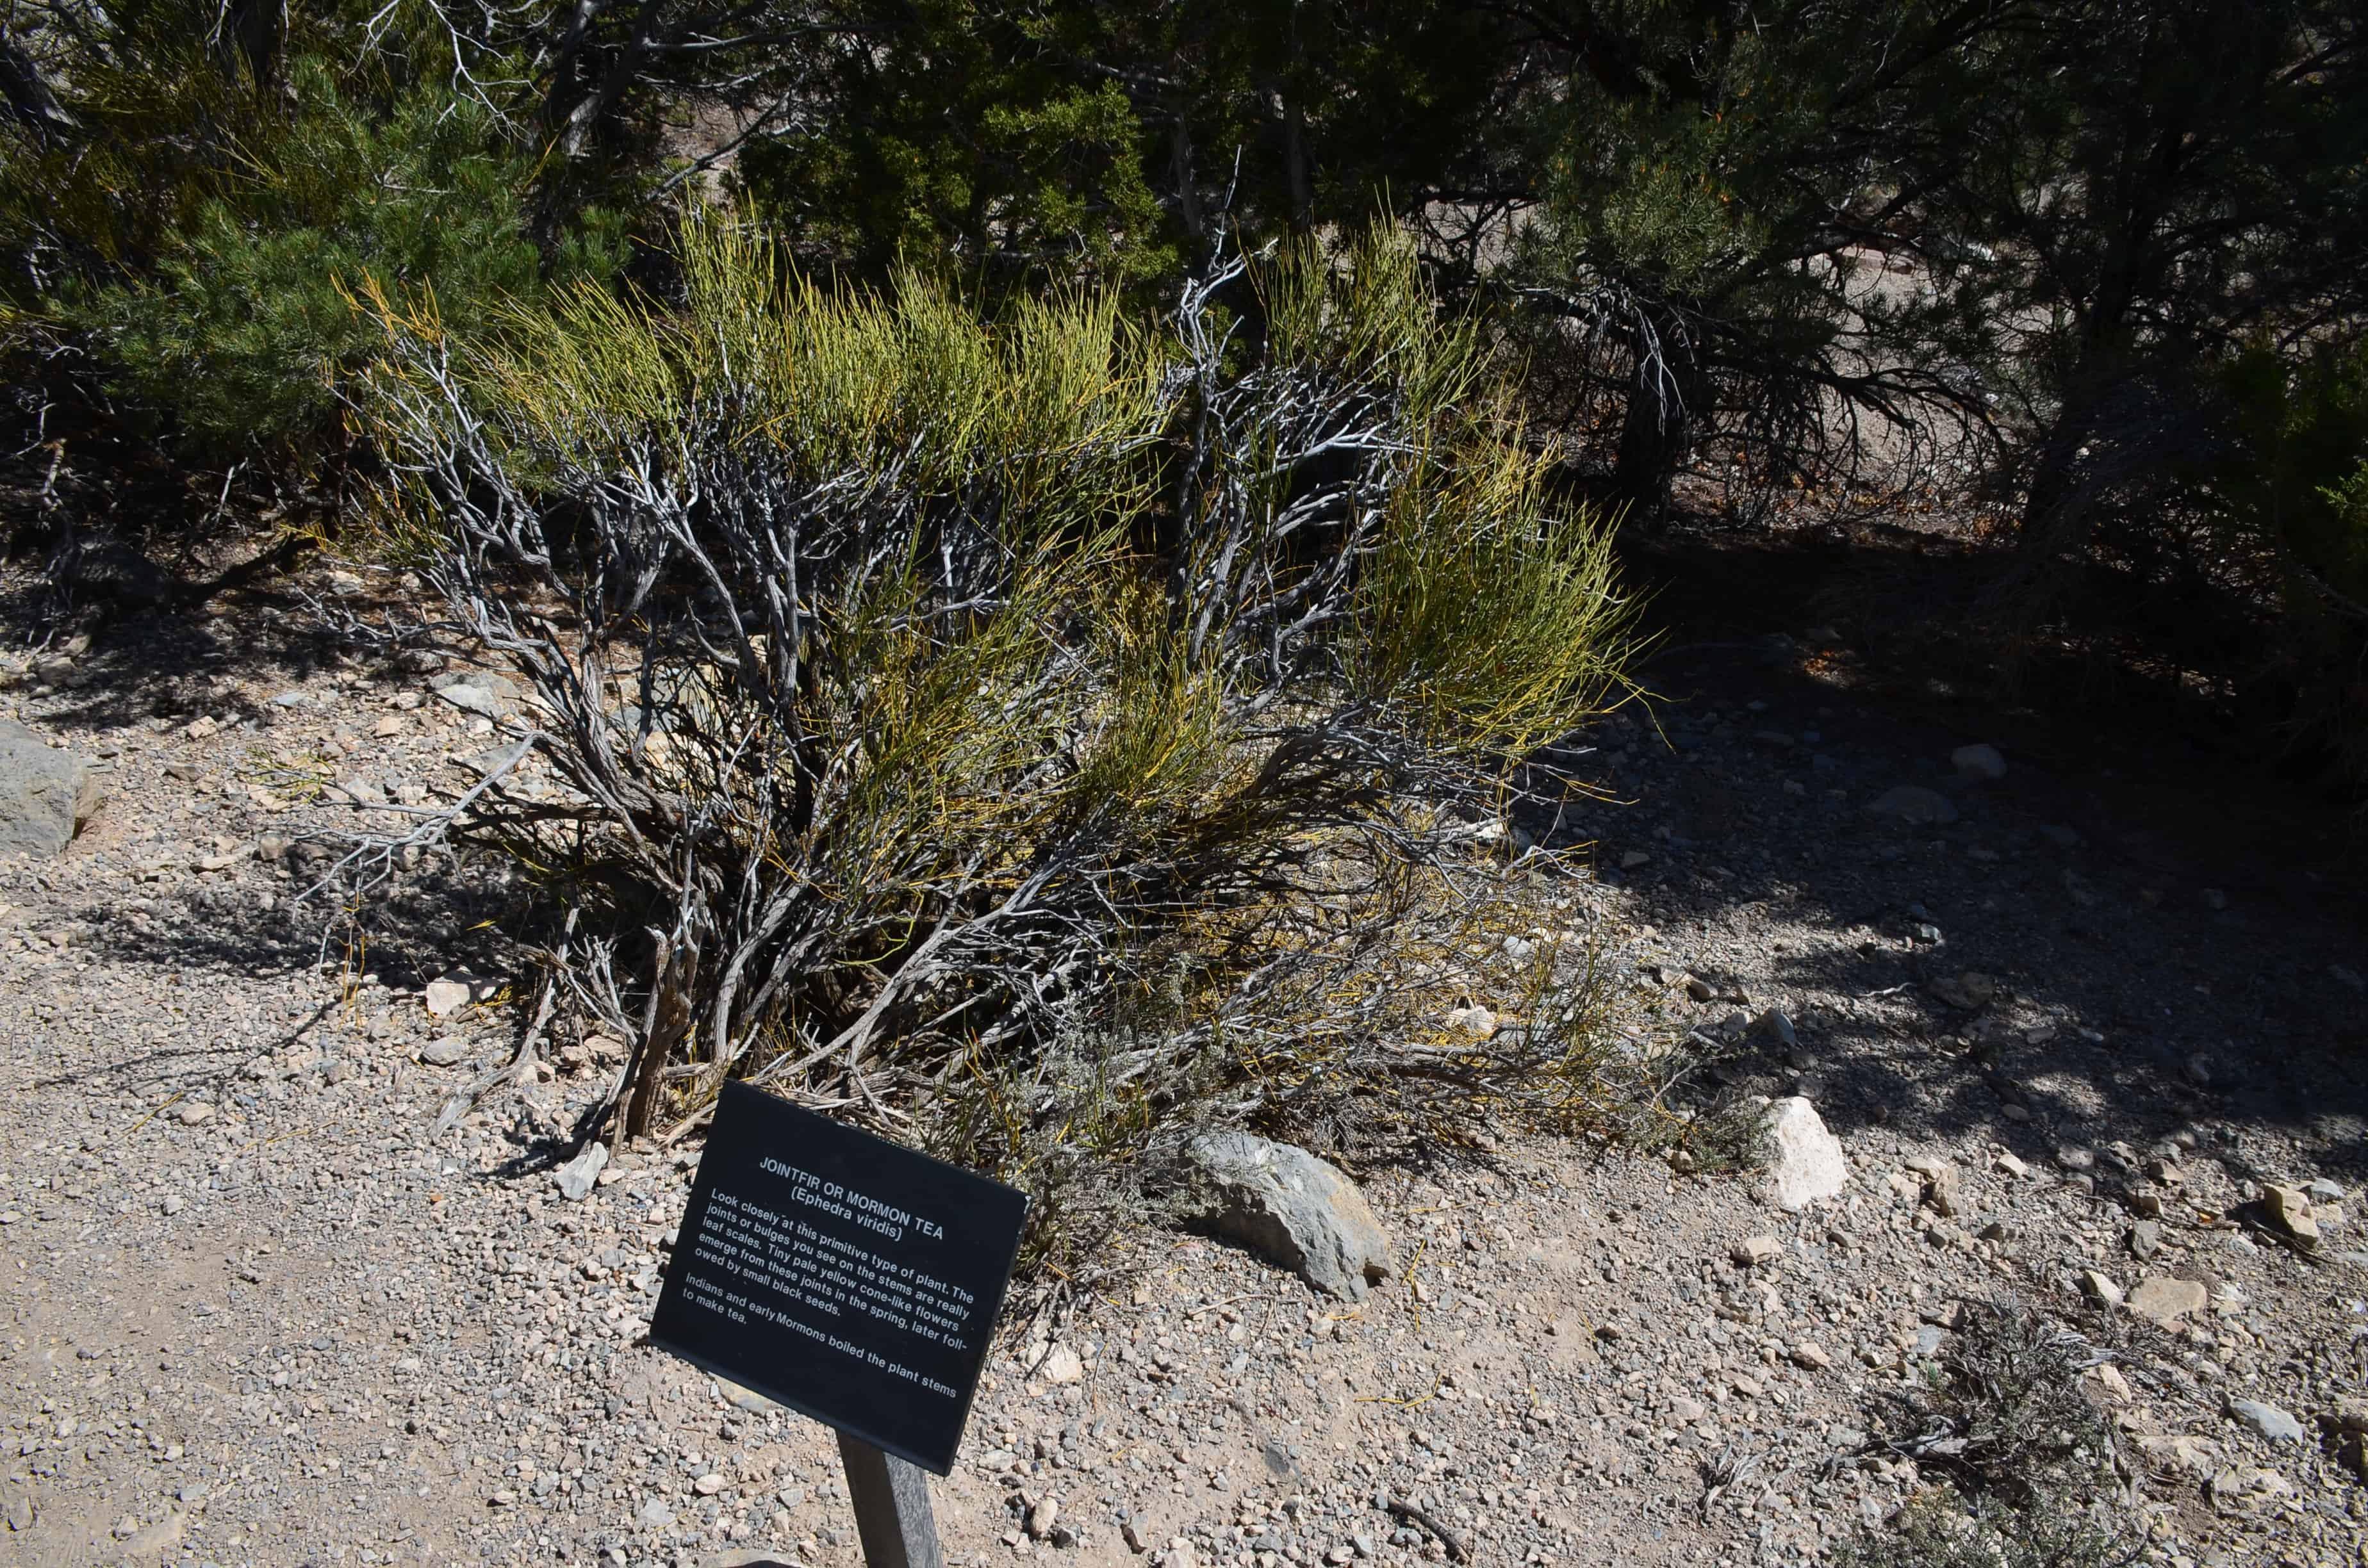 Mountain View Nature Trail at Great Basin National Park, Nevada